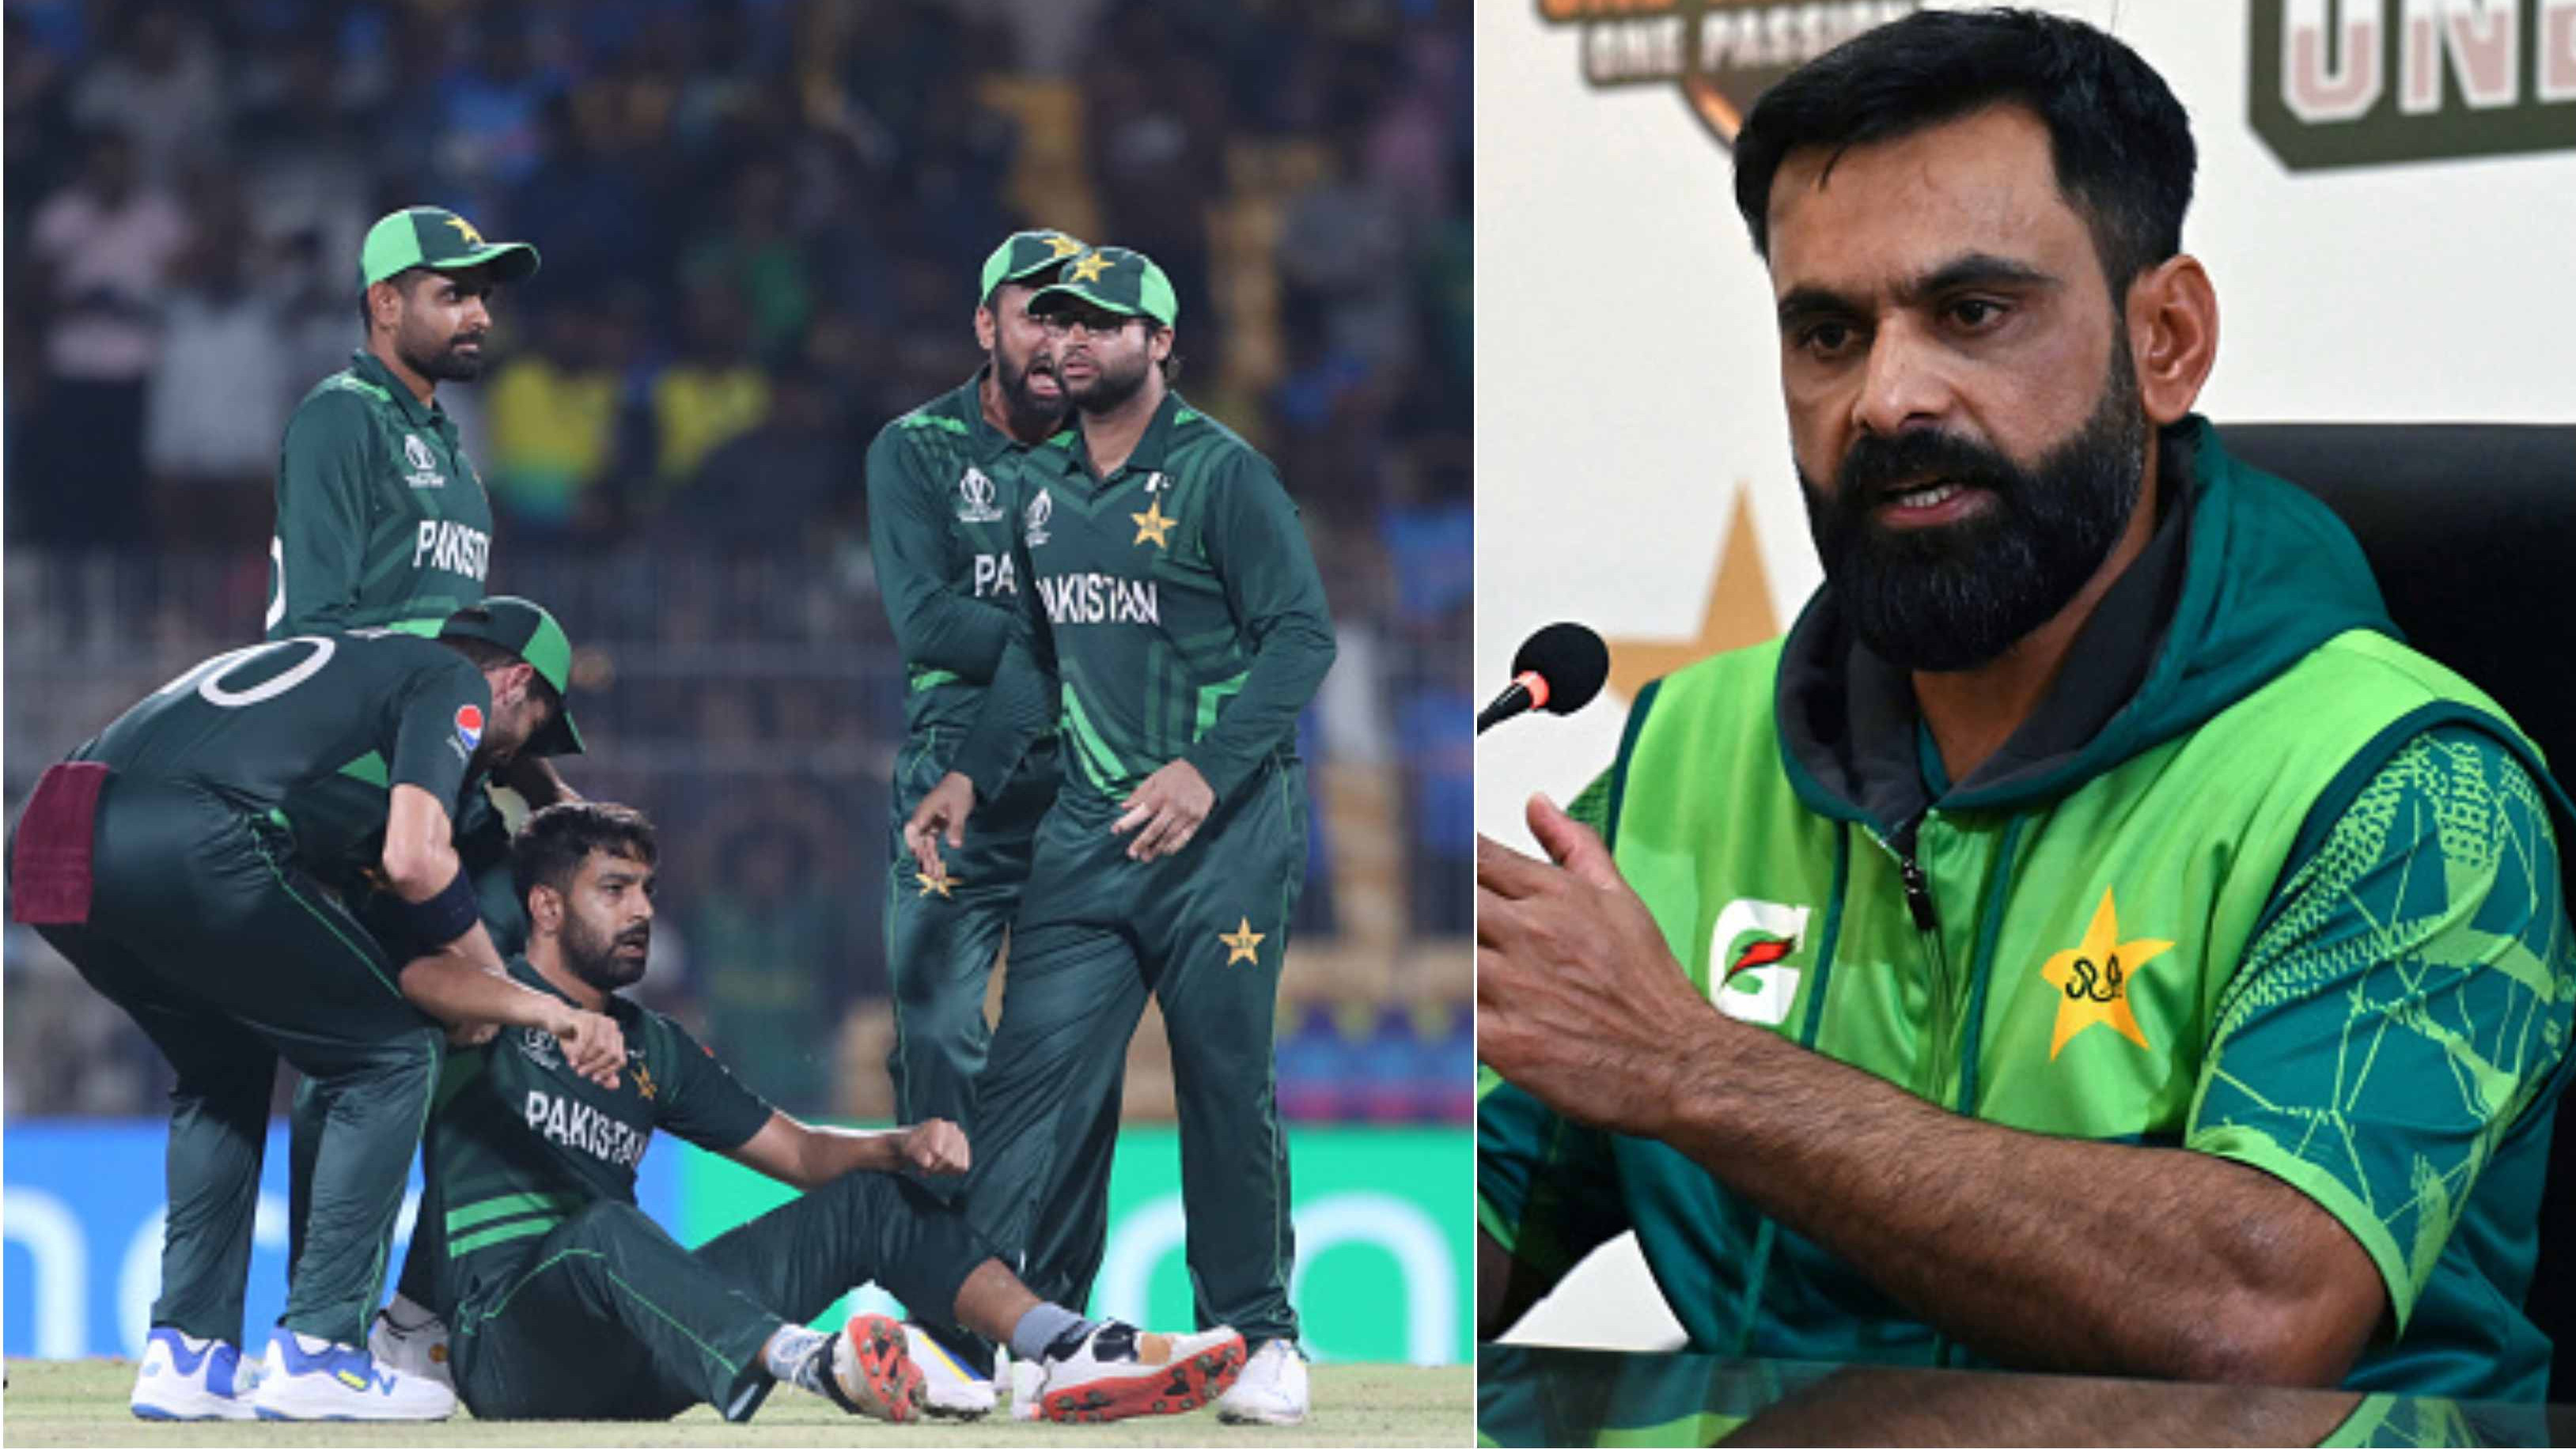 “Priority is Pakistan”: Hafeez asks contracted players to prioritise national duty over franchise leagues